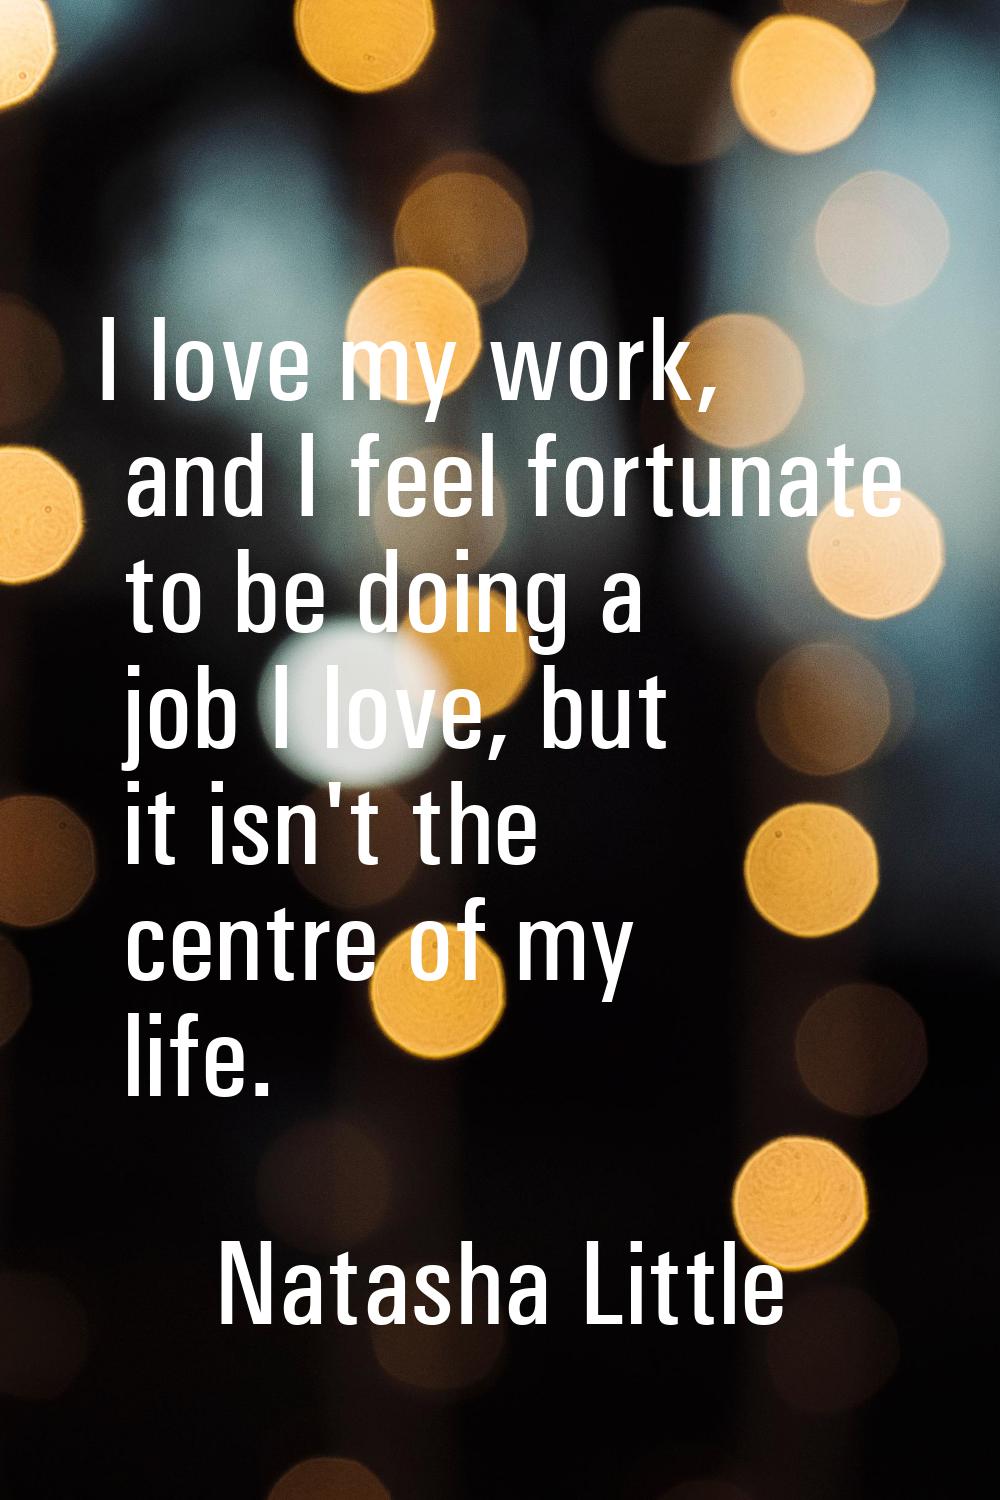 I love my work, and I feel fortunate to be doing a job I love, but it isn't the centre of my life.